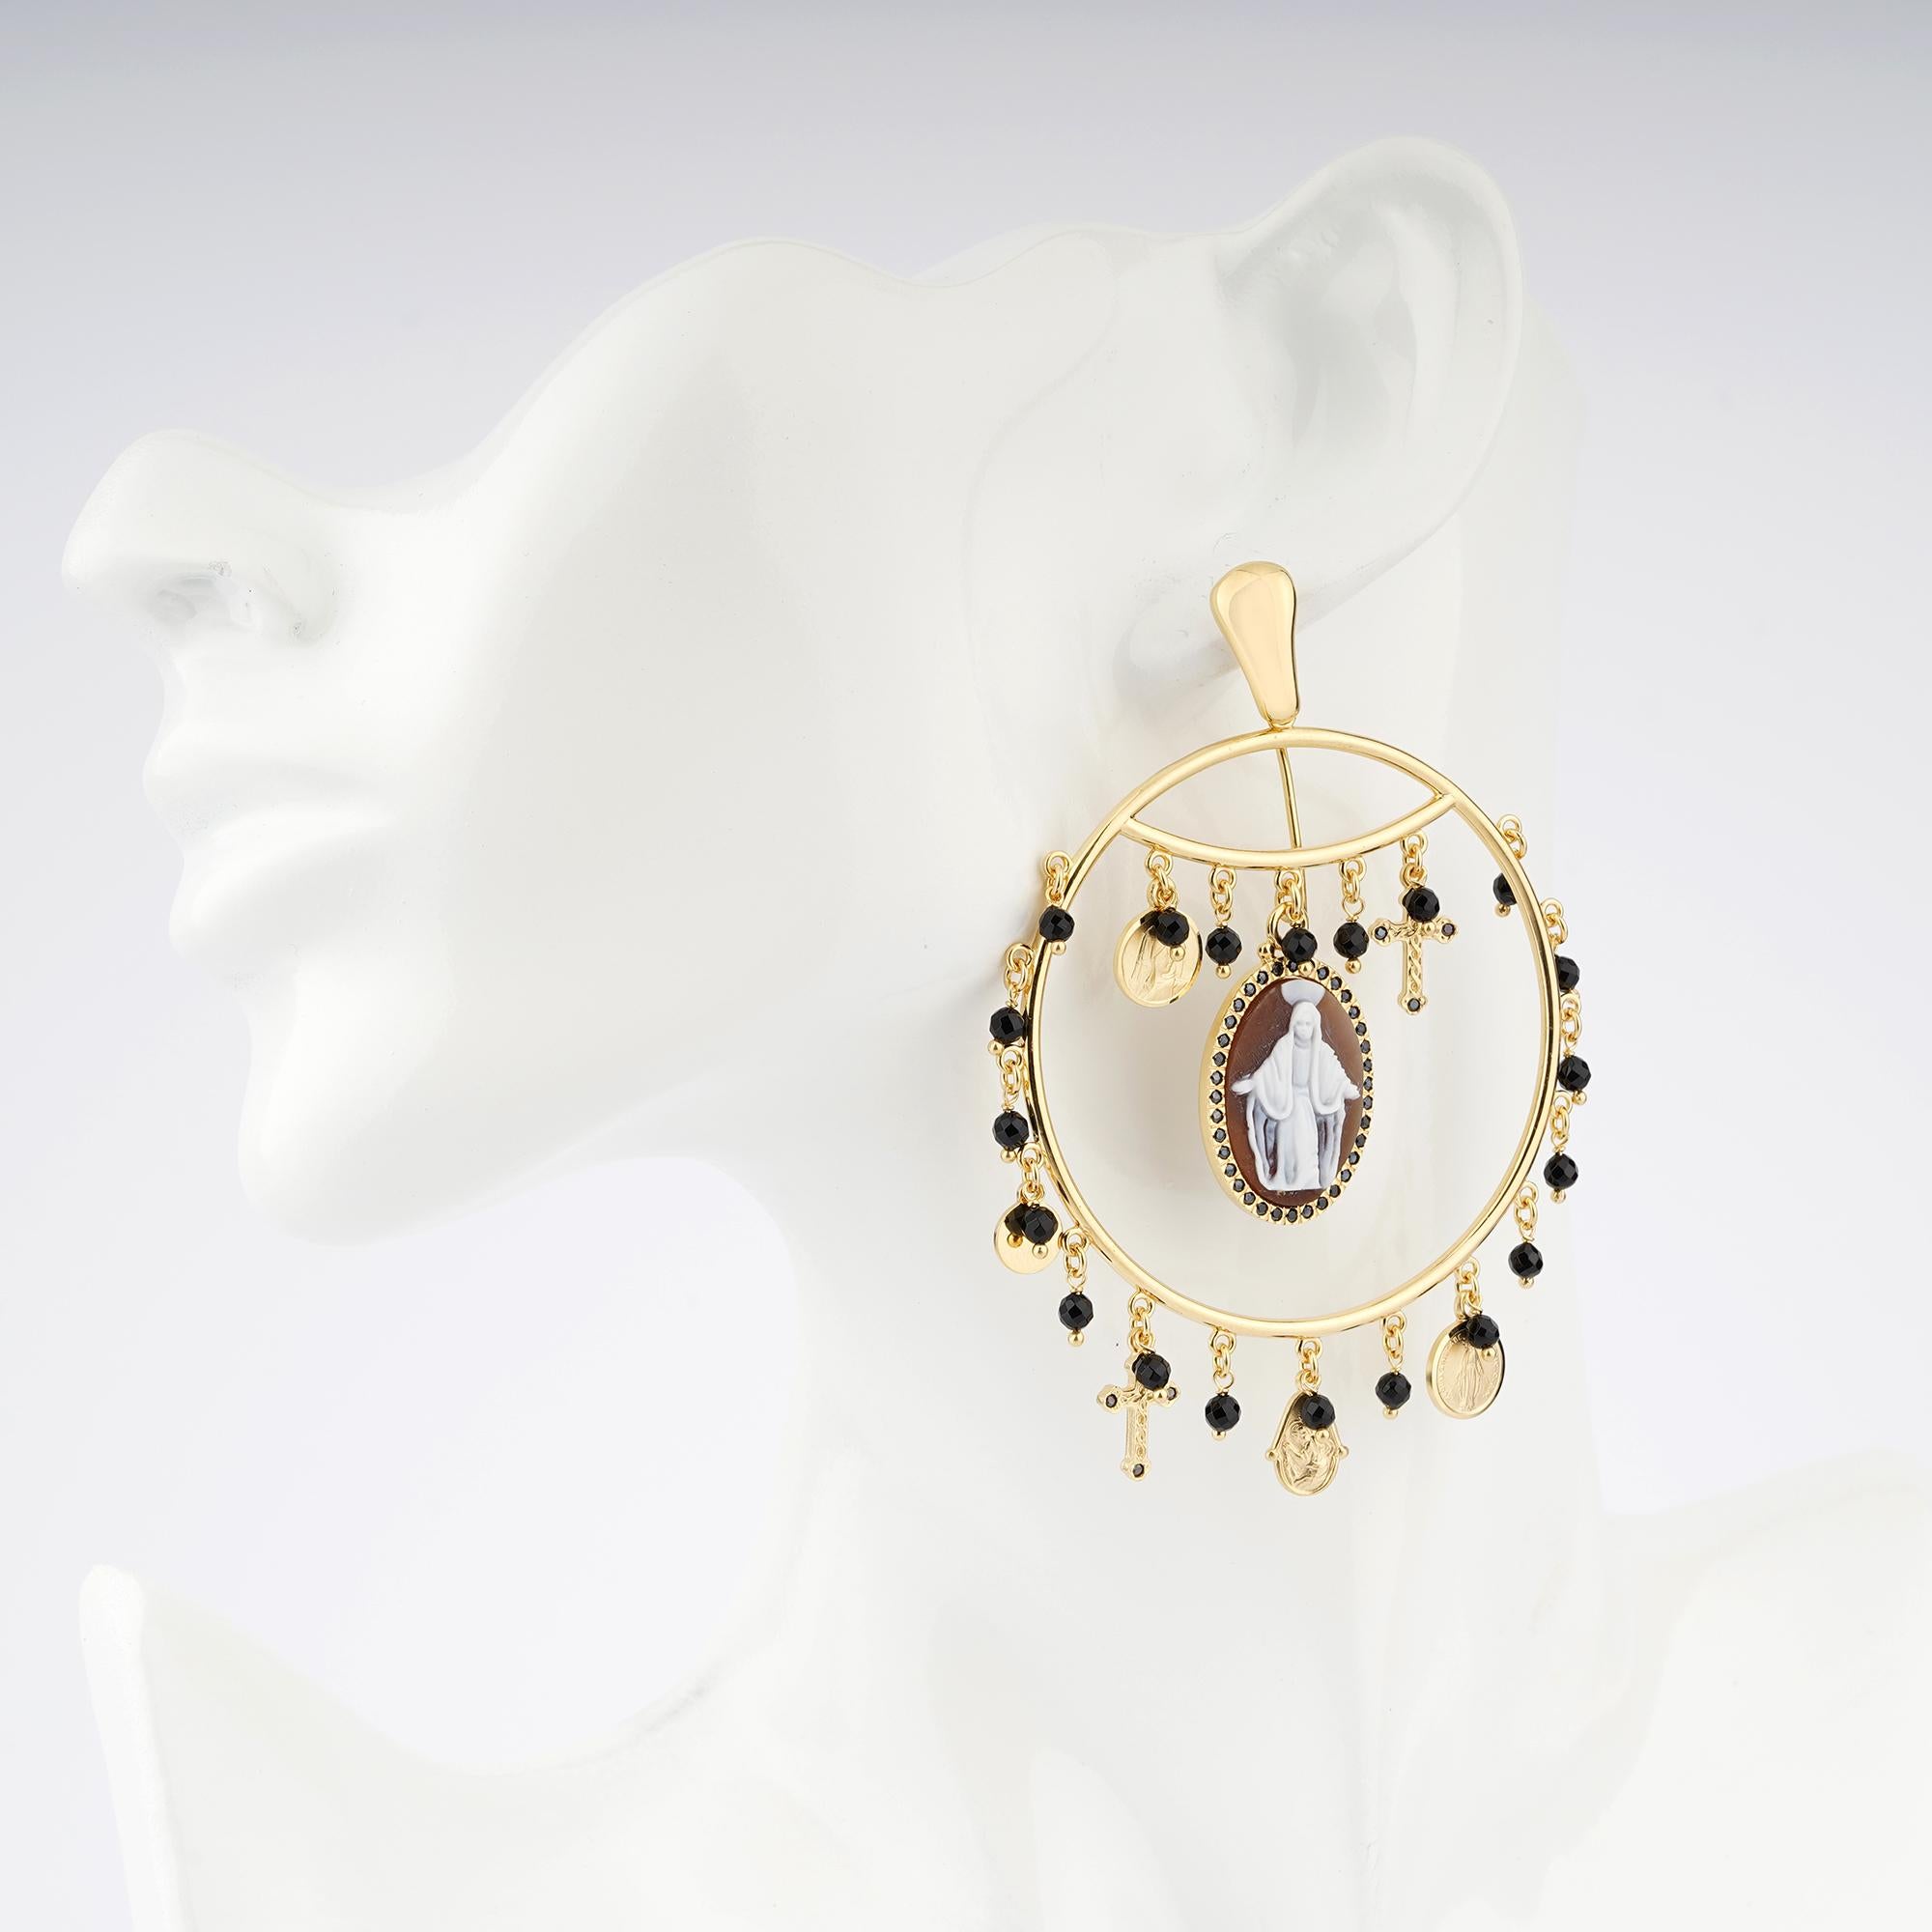 A necklace and its matching earrings make a stunning set. 

Made in Italy custom jewelry parure features fully handcarved Madonna on sea shell cameos 
set in a 18 carat gold plated 925 silver with black onyx, white and black cz and fresh water